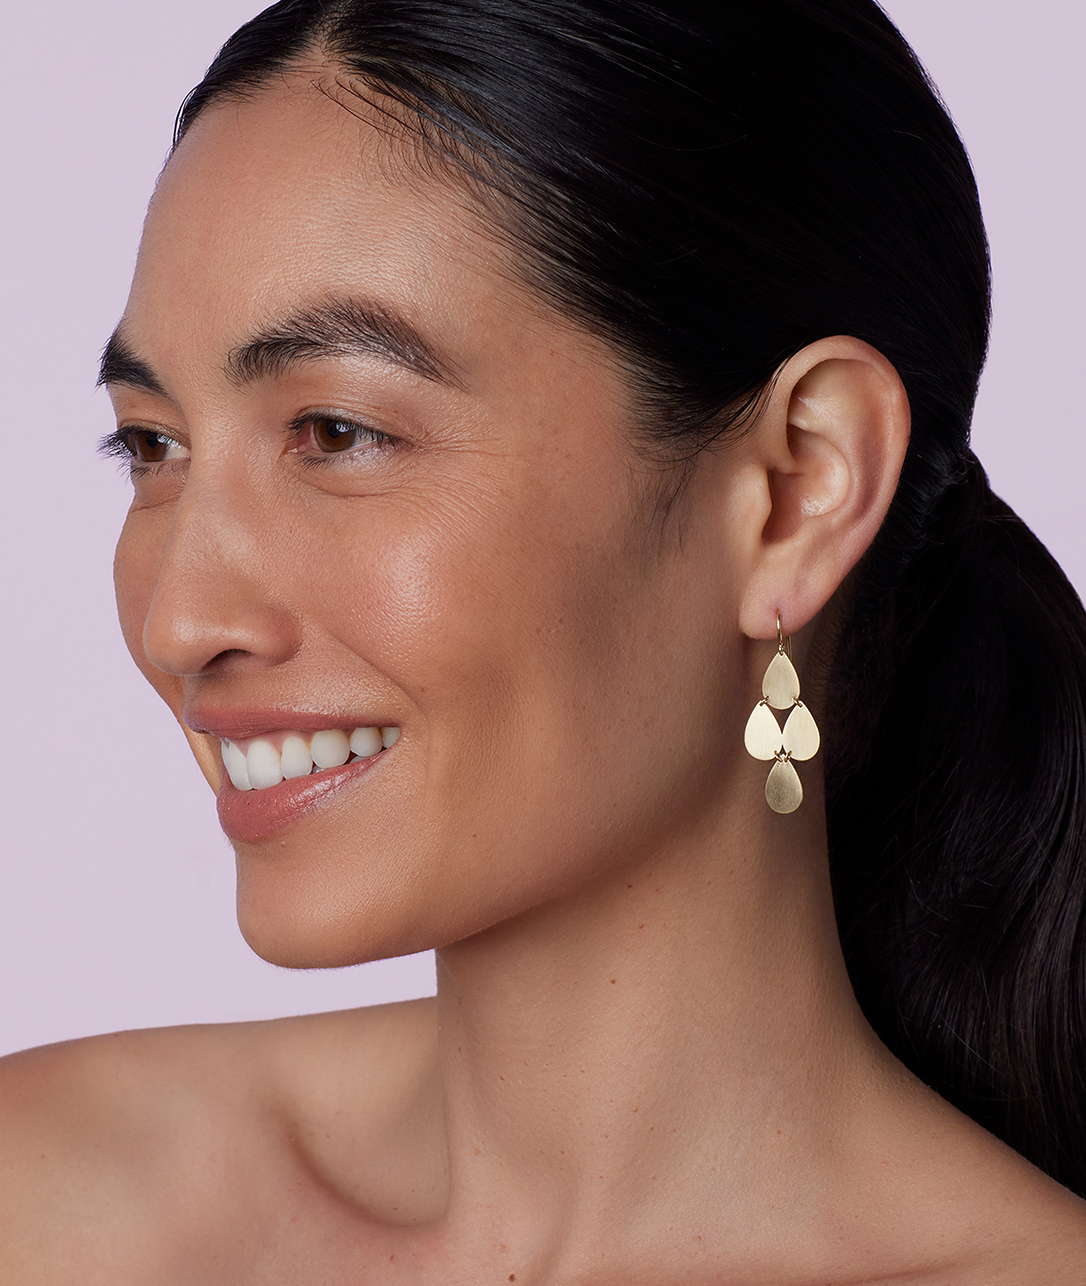 One of our very first styles, our Gold Classic Four Drop Earrings have become instantly recognizable as a signature of Irene.